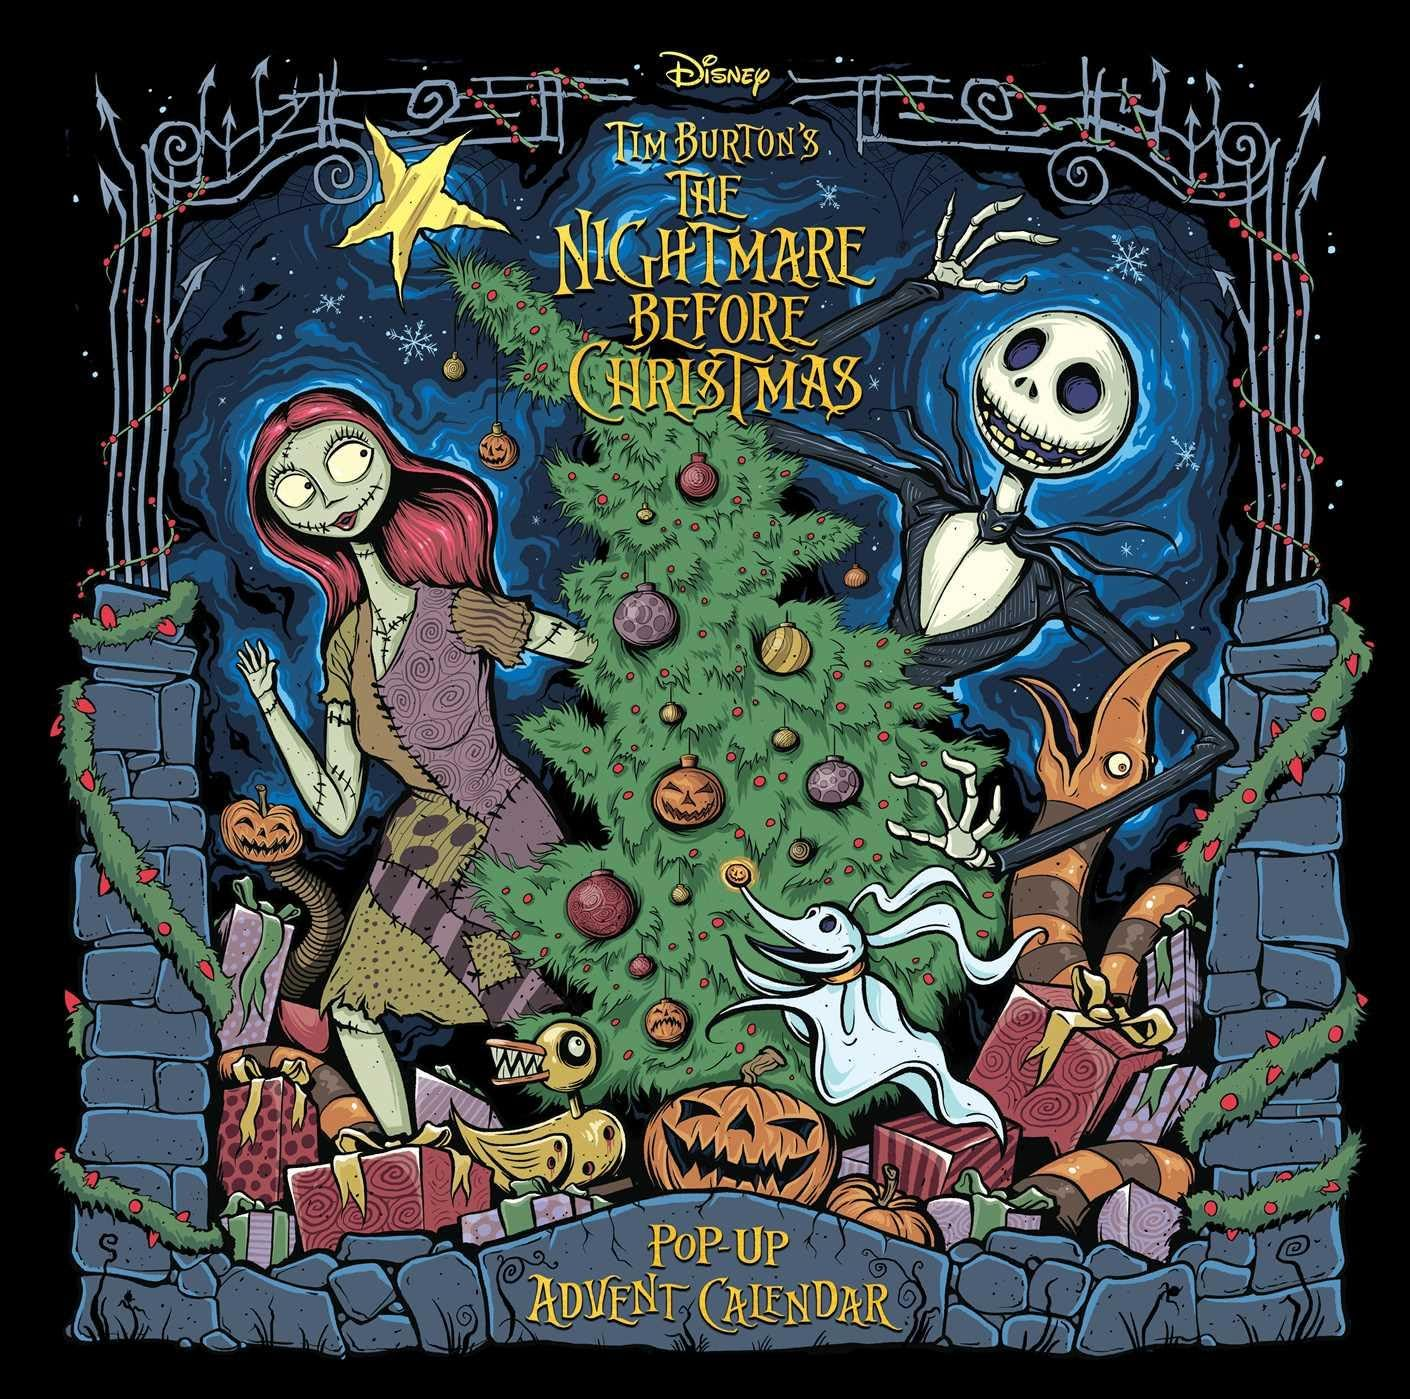 The Nightmare Before Christmas - Pop-up Book and Advent Calendar: Advent Calendar and Pop-Up Book